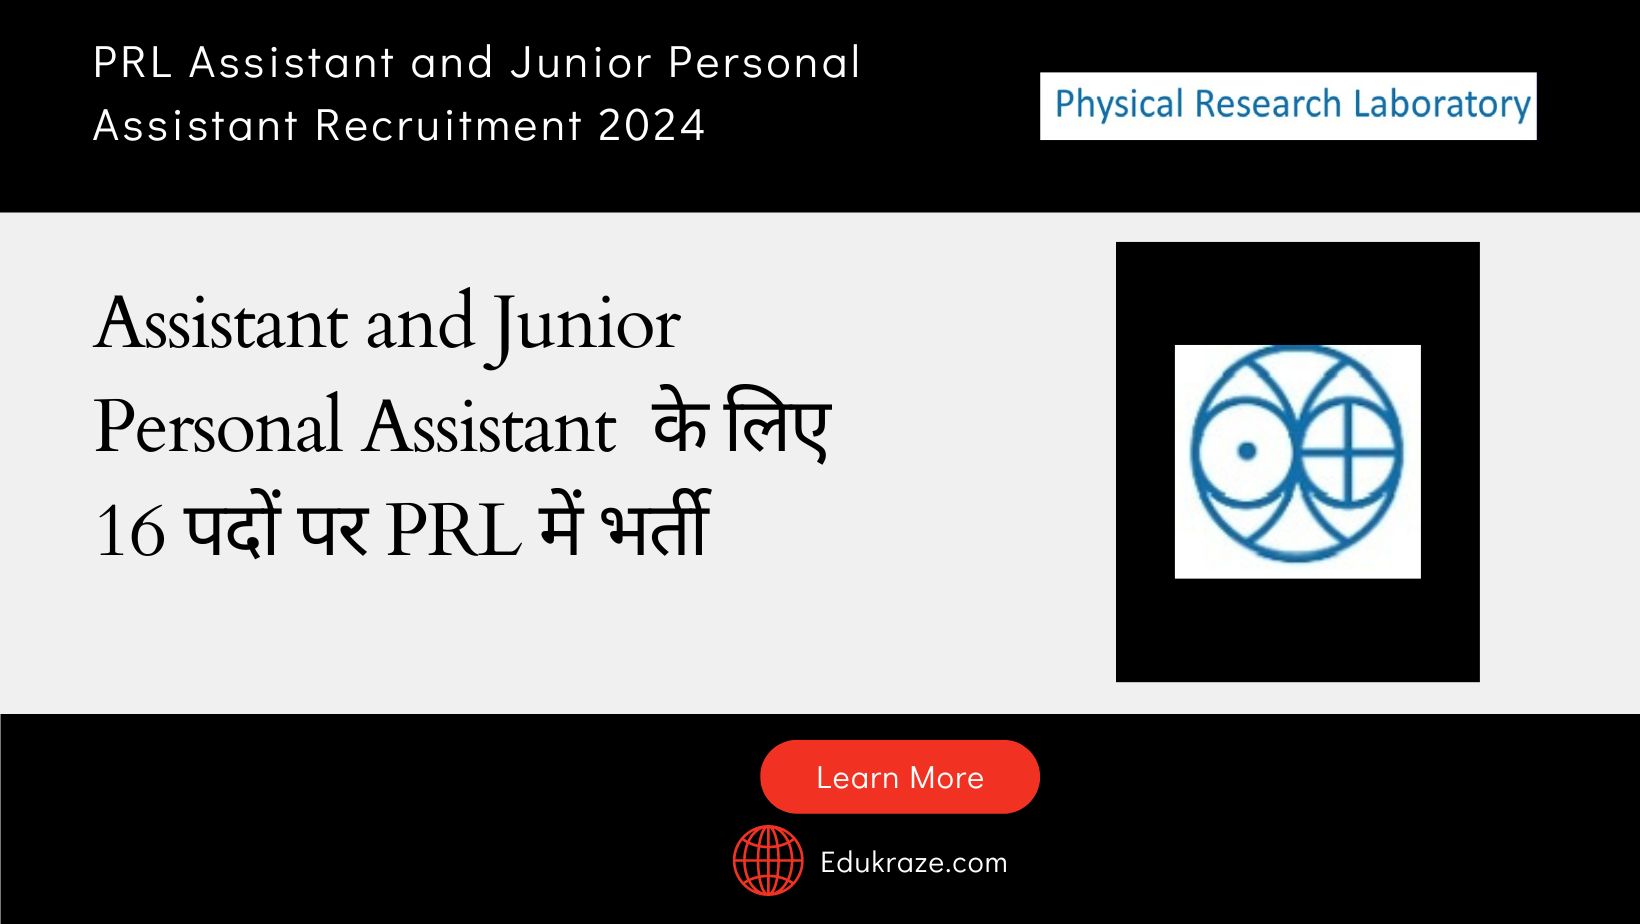 PRL Assistant and Junior Personal Assistant Recruitment 2024